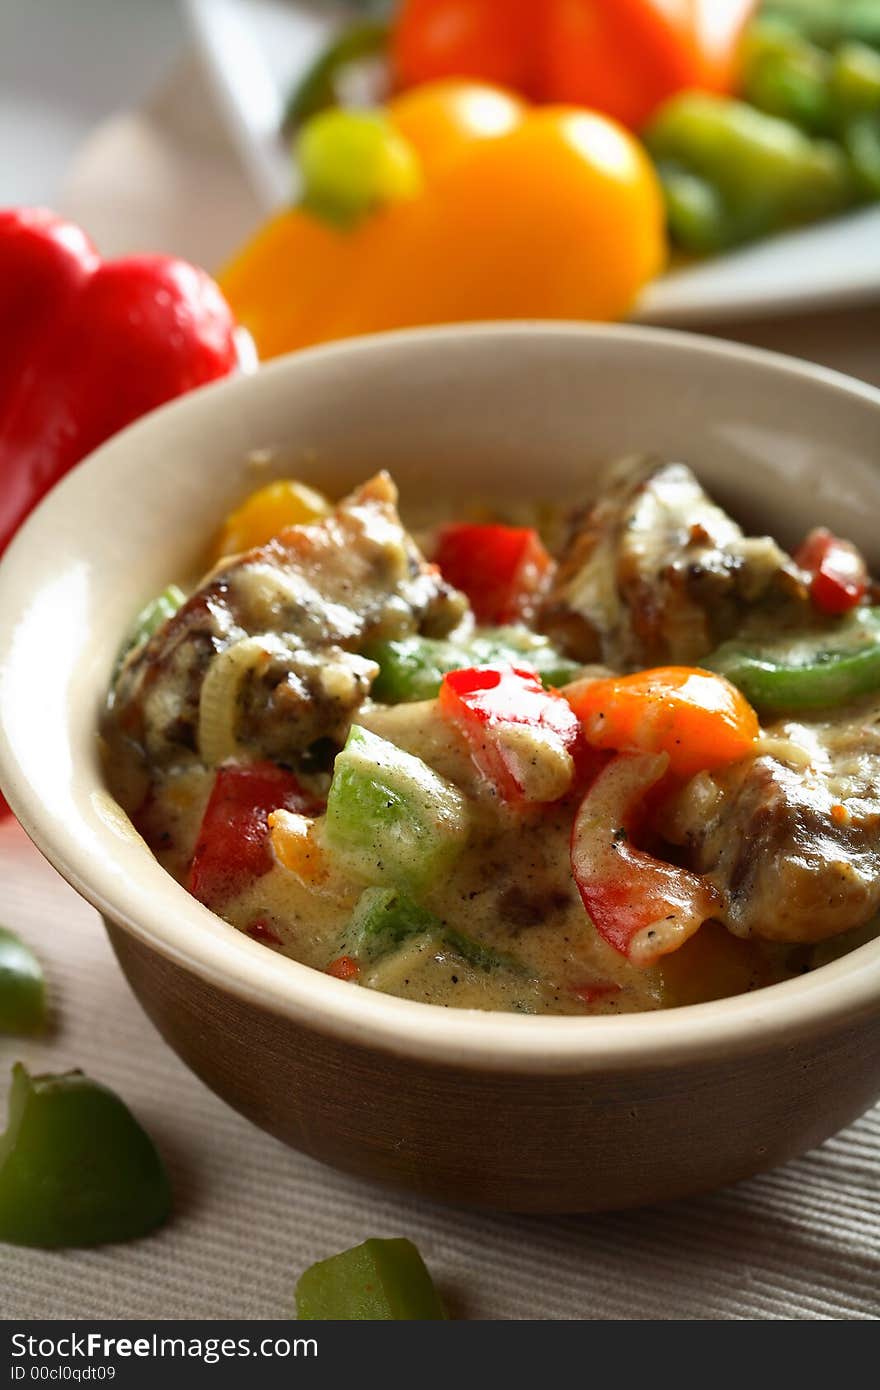 Tasty chicken with red, yellow and green pepper. Tasty chicken with red, yellow and green pepper